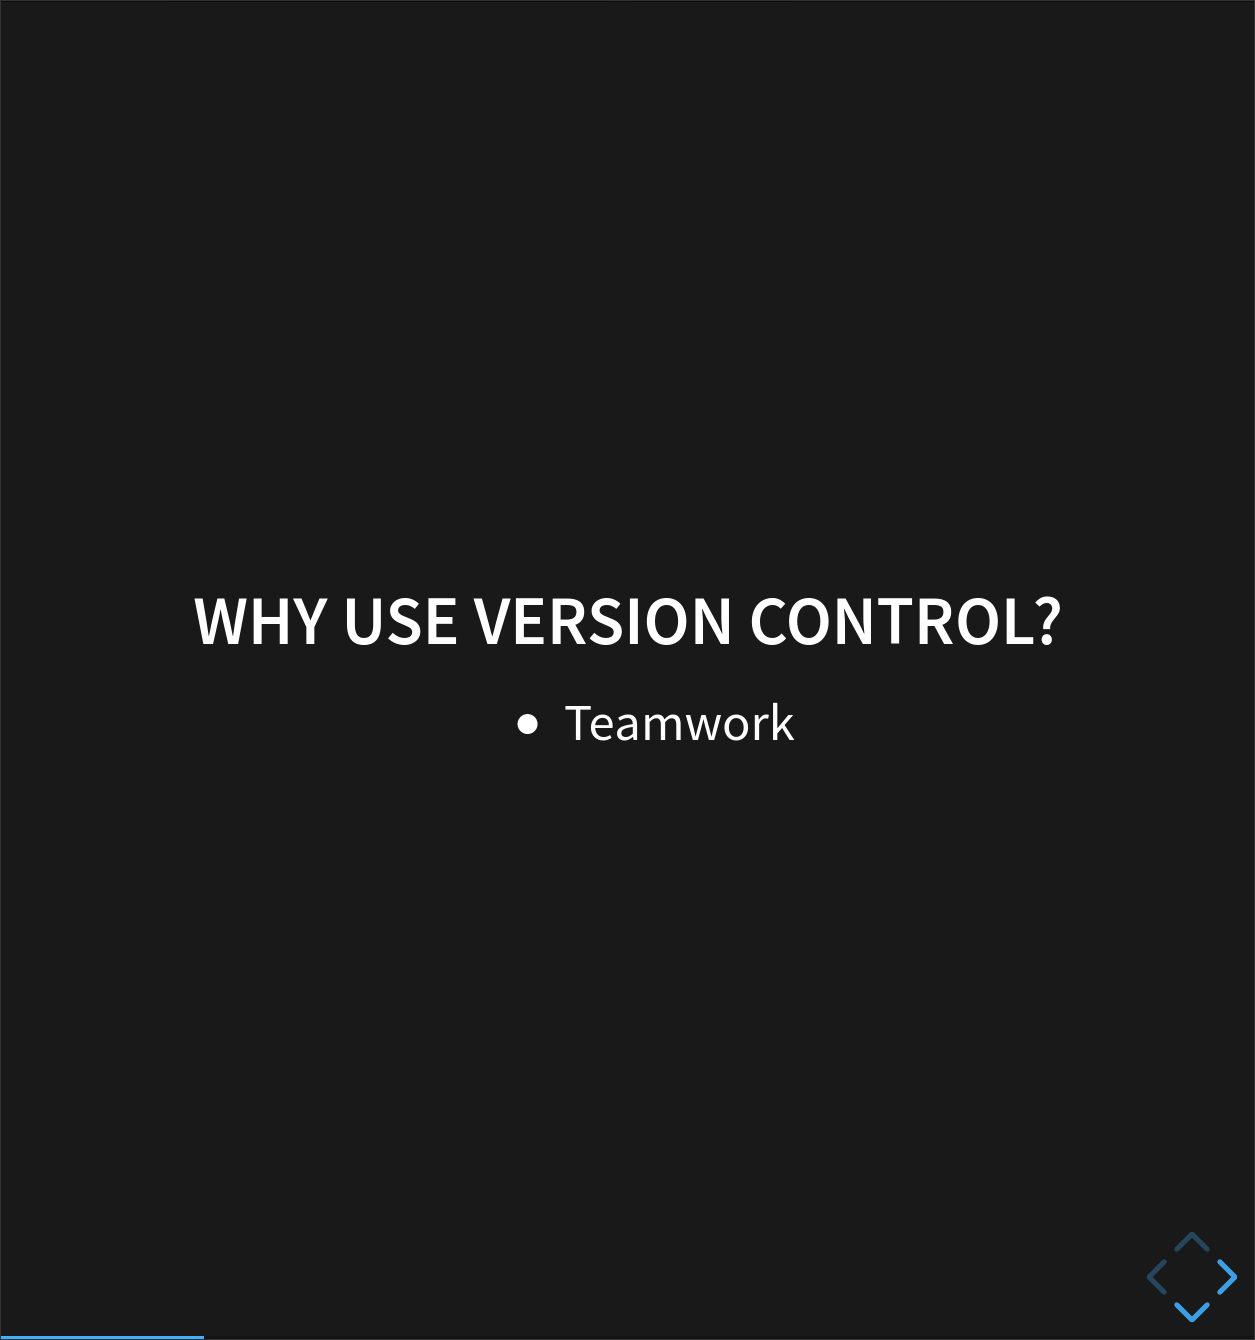 Why Use Version Control? #2